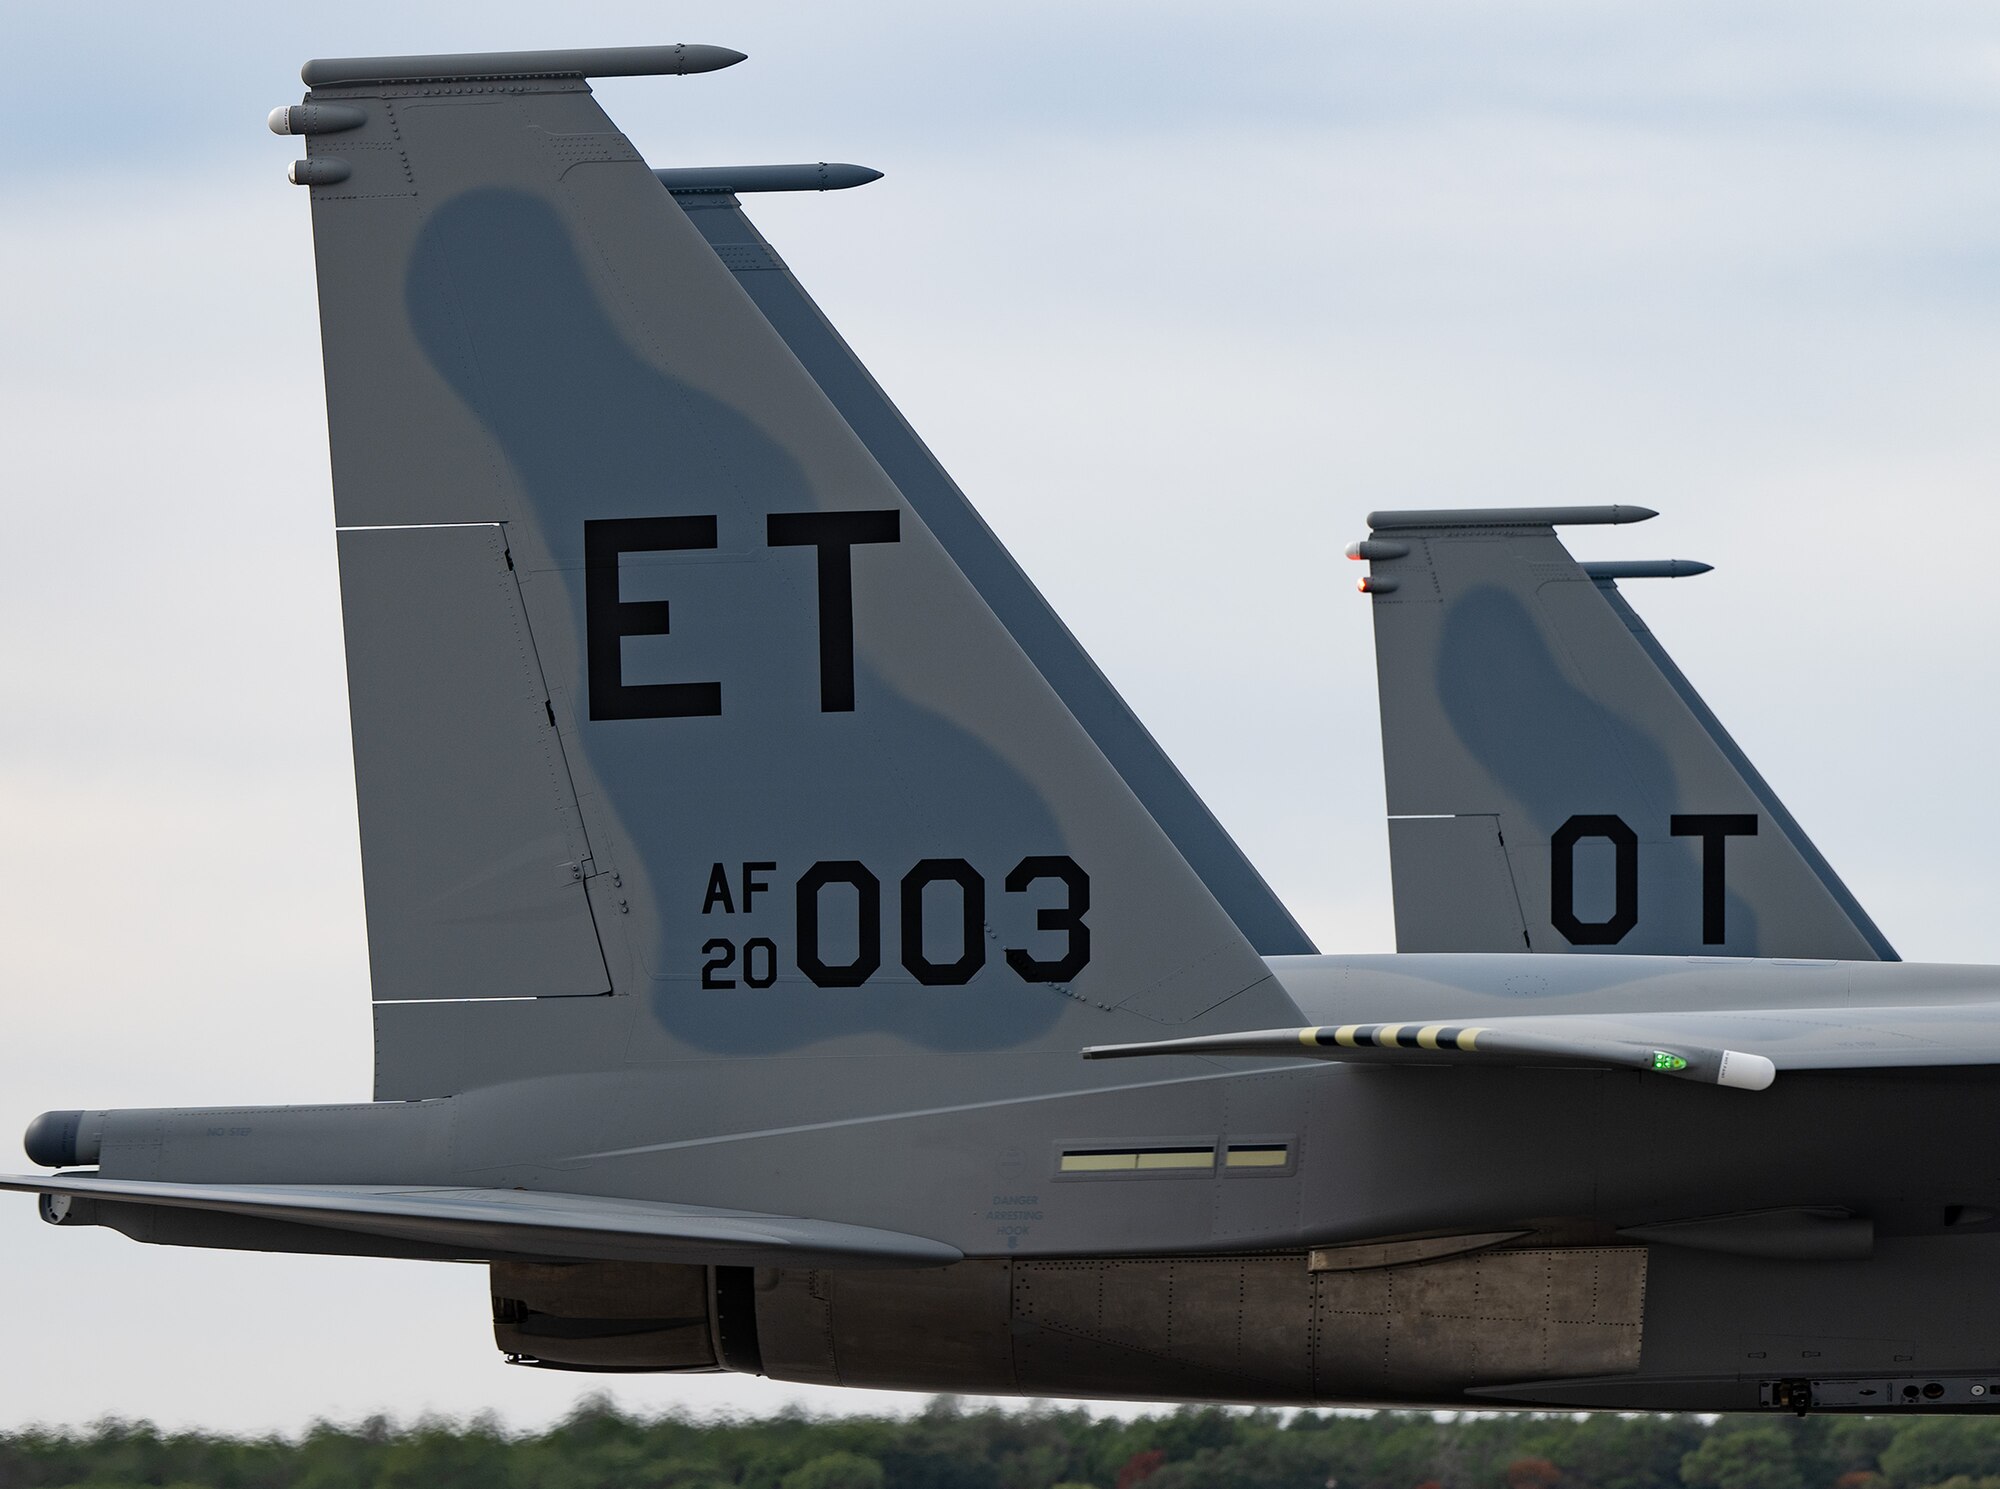 Two fighter jet tails cropped in tight.